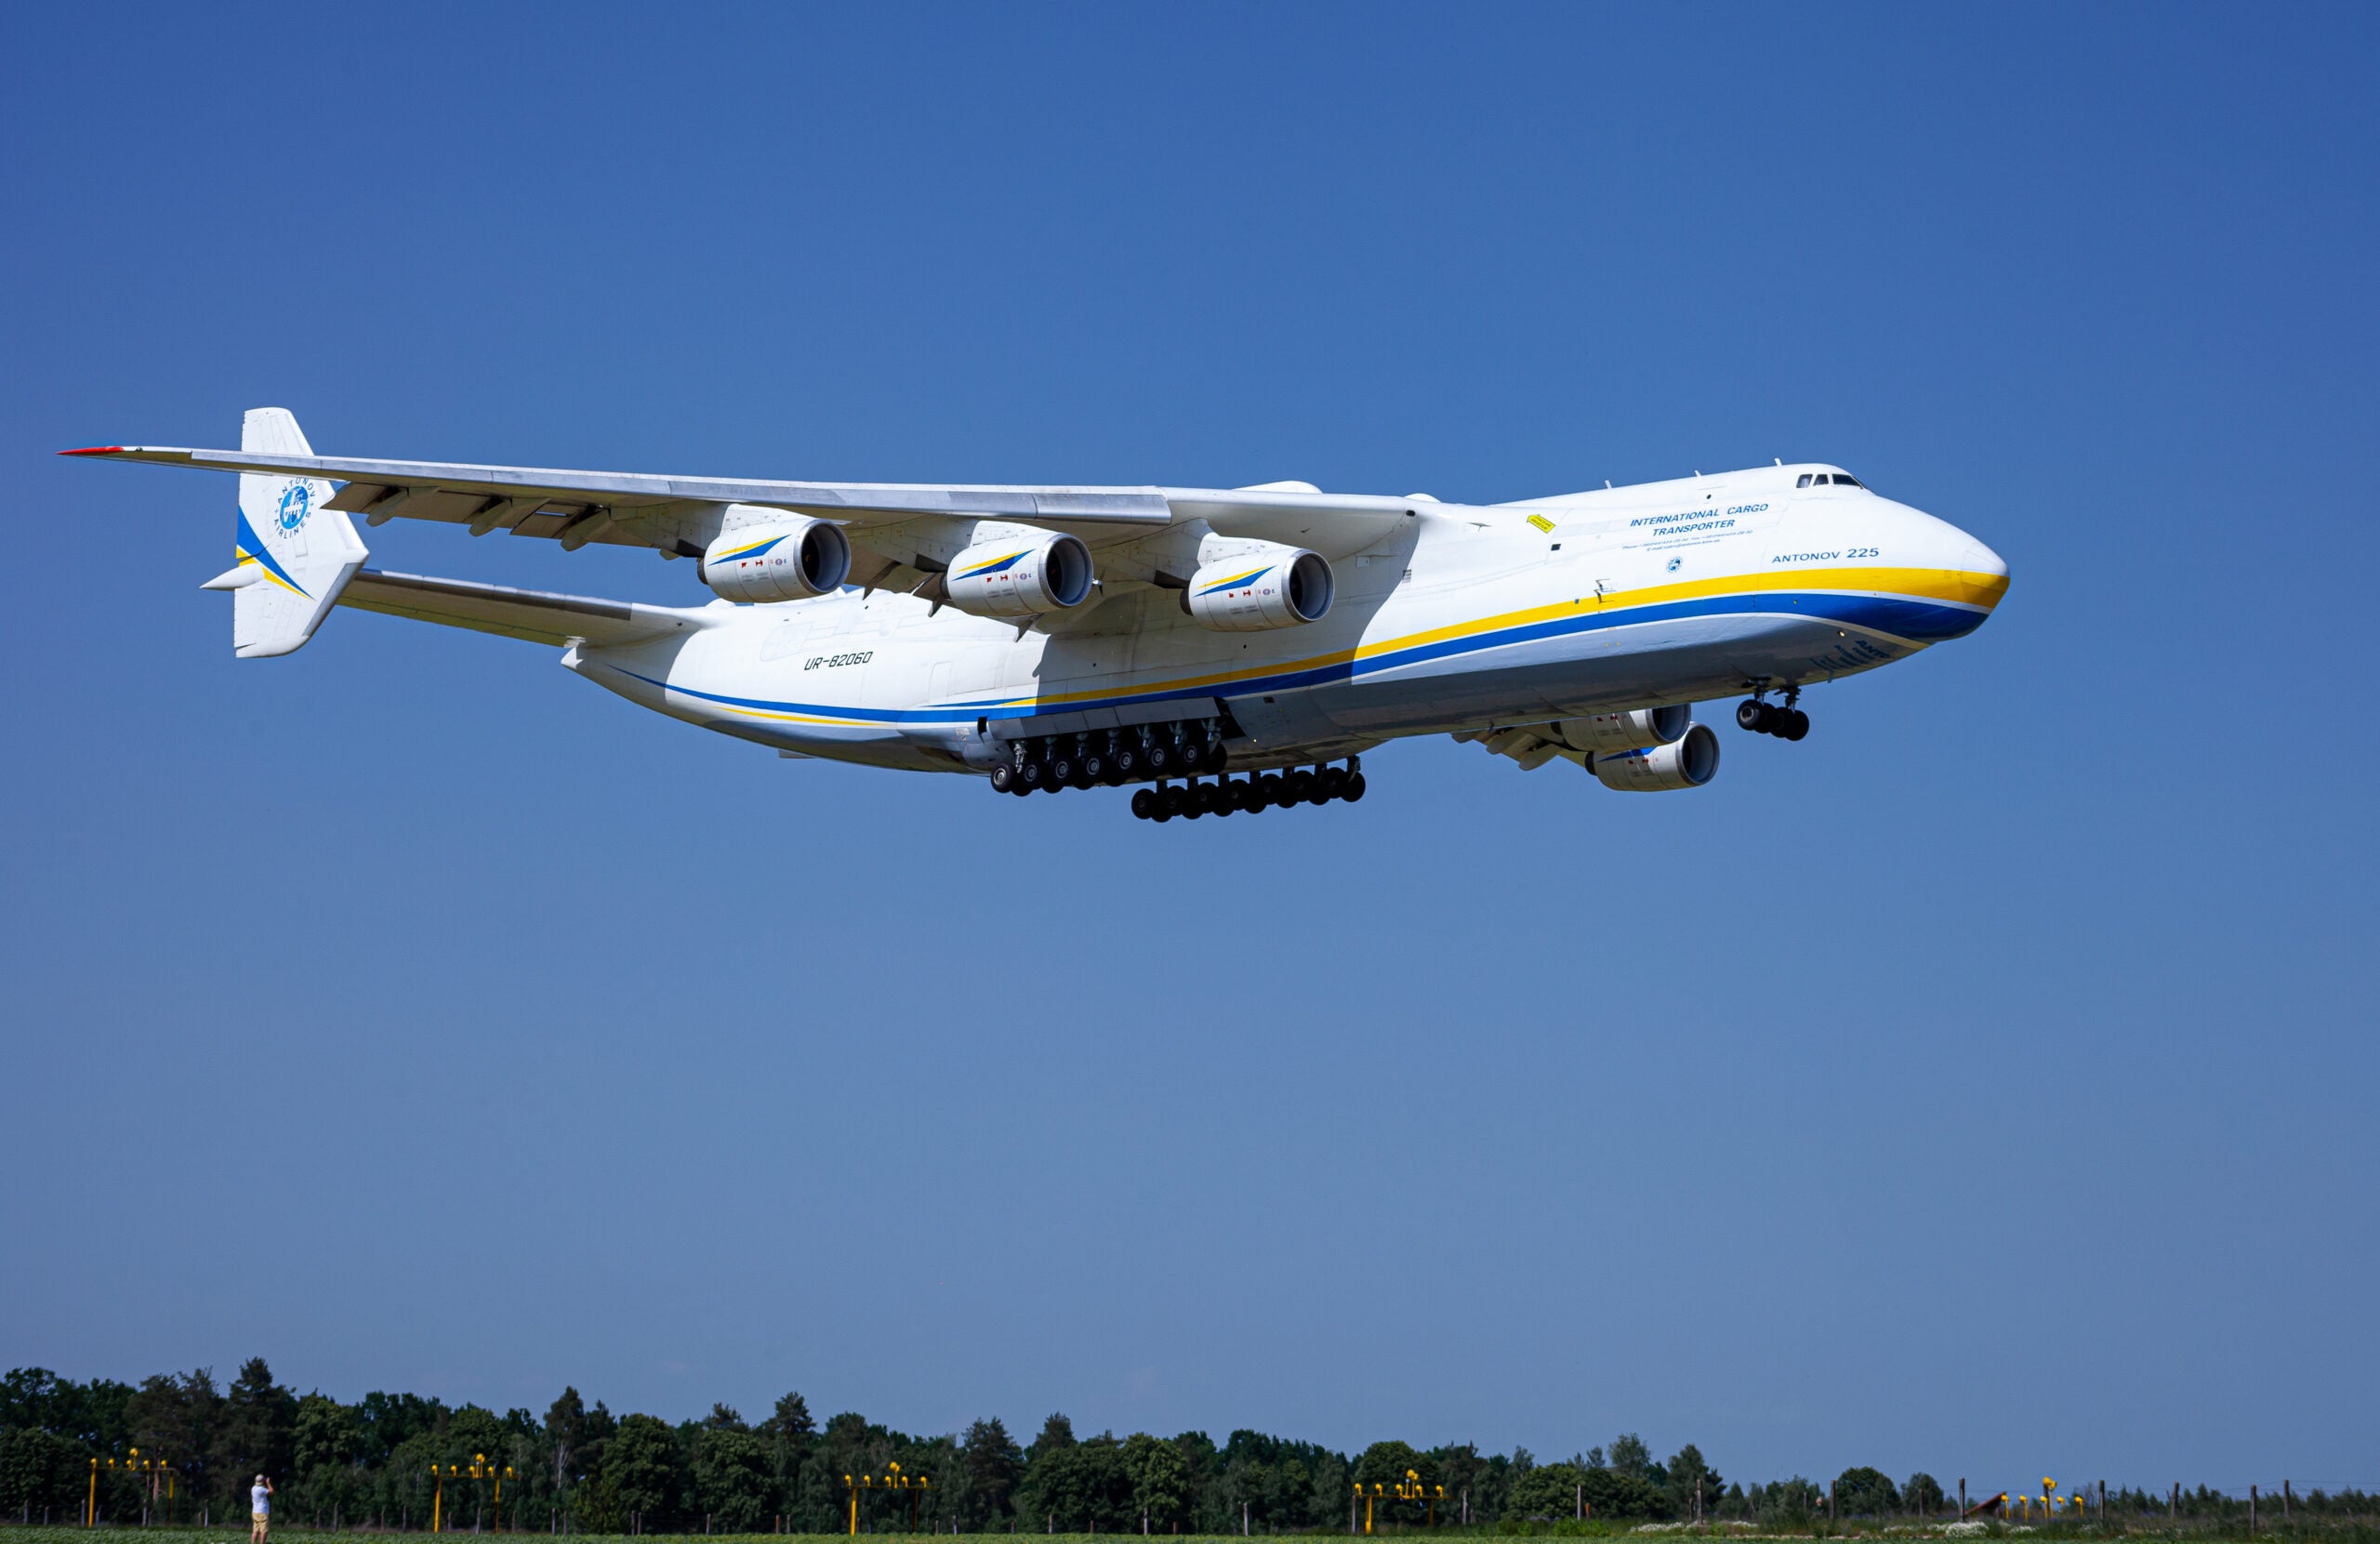 Antonov Launches Fundraiser for ‘Revival’ of World’s Largest Cargo Airplane